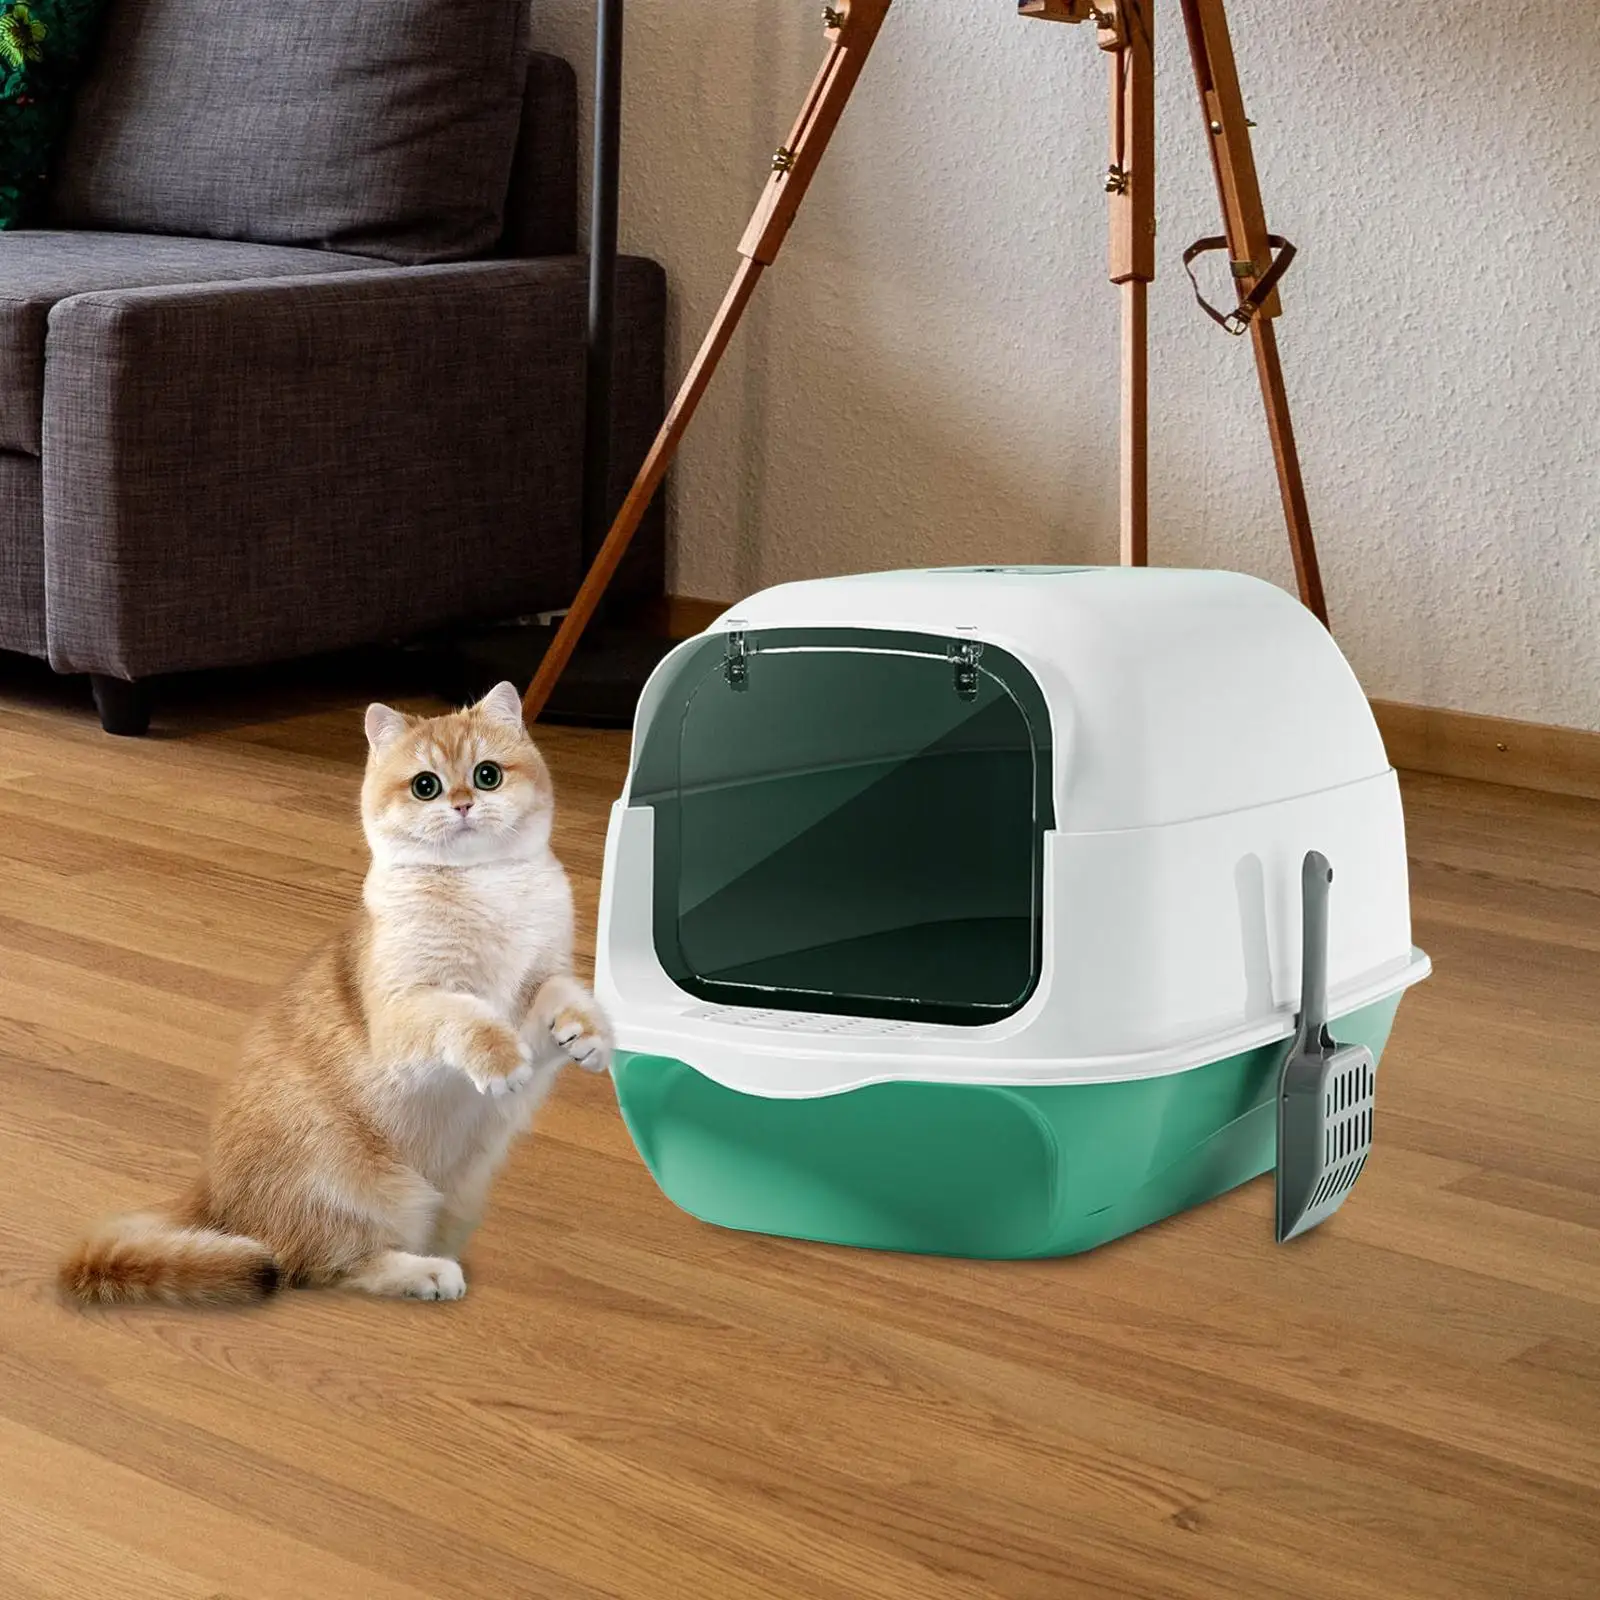 Hooded Cat Litter Box with Lid Enclosed and Covered Cat Toilet Anti Splashing with Shovel Large for Indoor Cats Cat Litter Tray